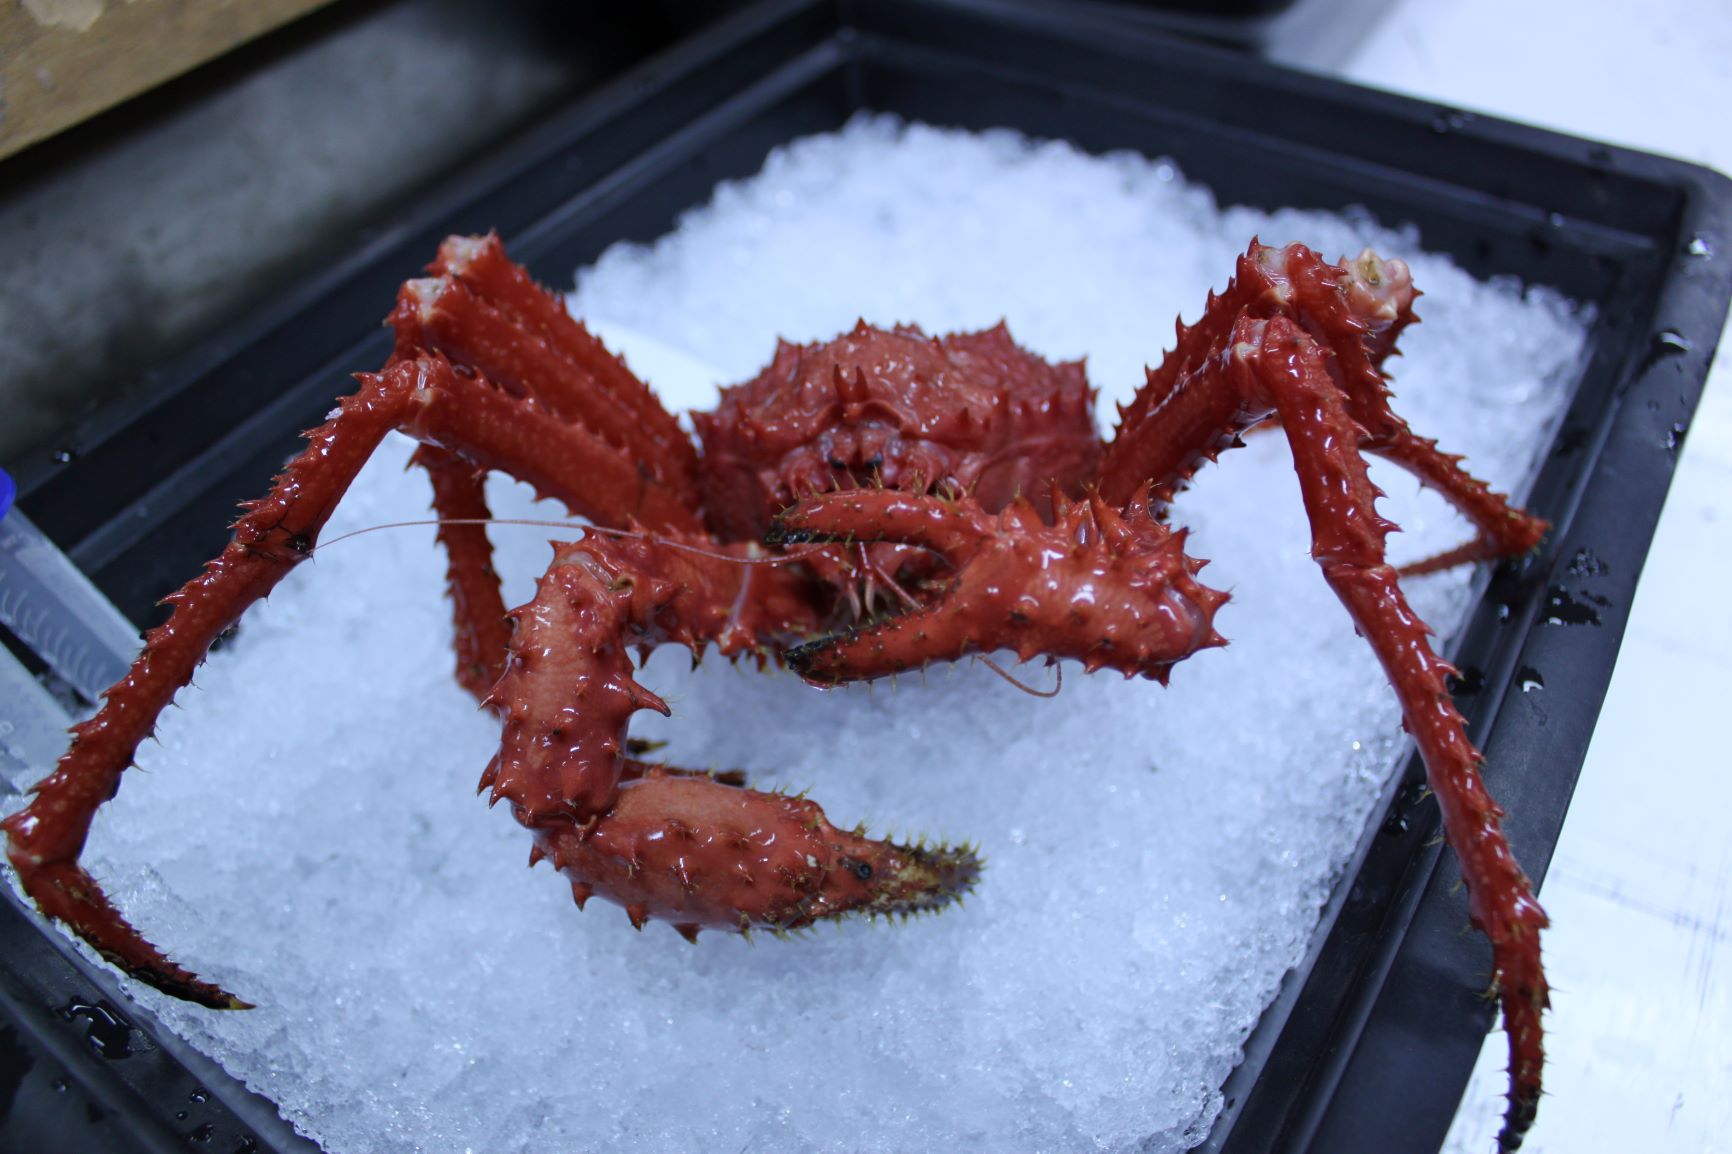 large red spiny crab sits on crushed ice in a black tray